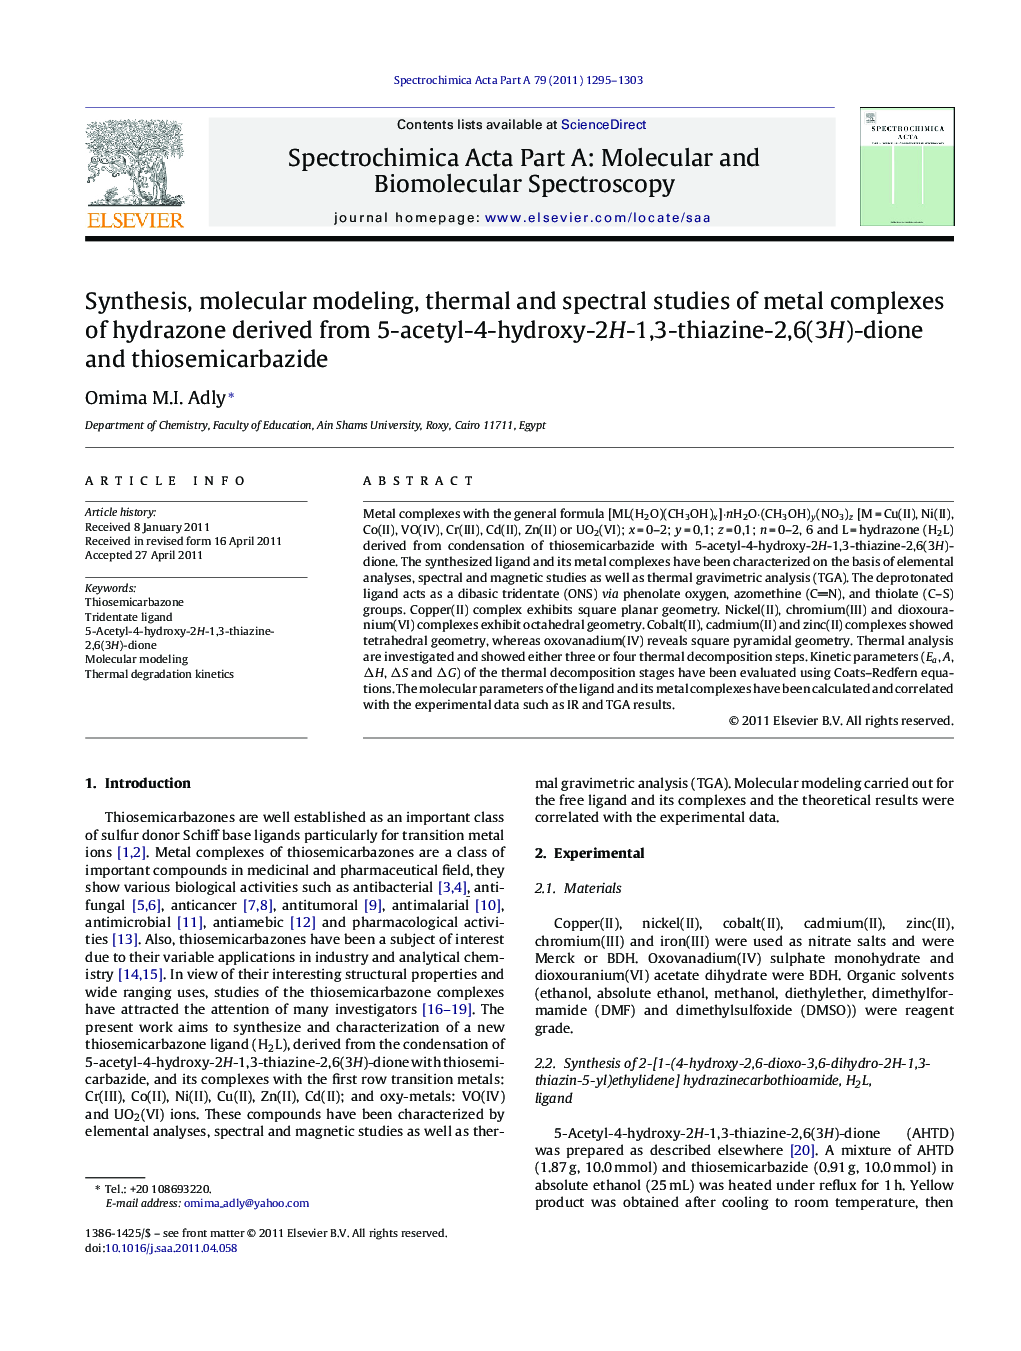 Synthesis, molecular modeling, thermal and spectral studies of metal complexes of hydrazone derived from 5-acetyl-4-hydroxy-2H-1,3-thiazine-2,6(3H)-dione and thiosemicarbazide